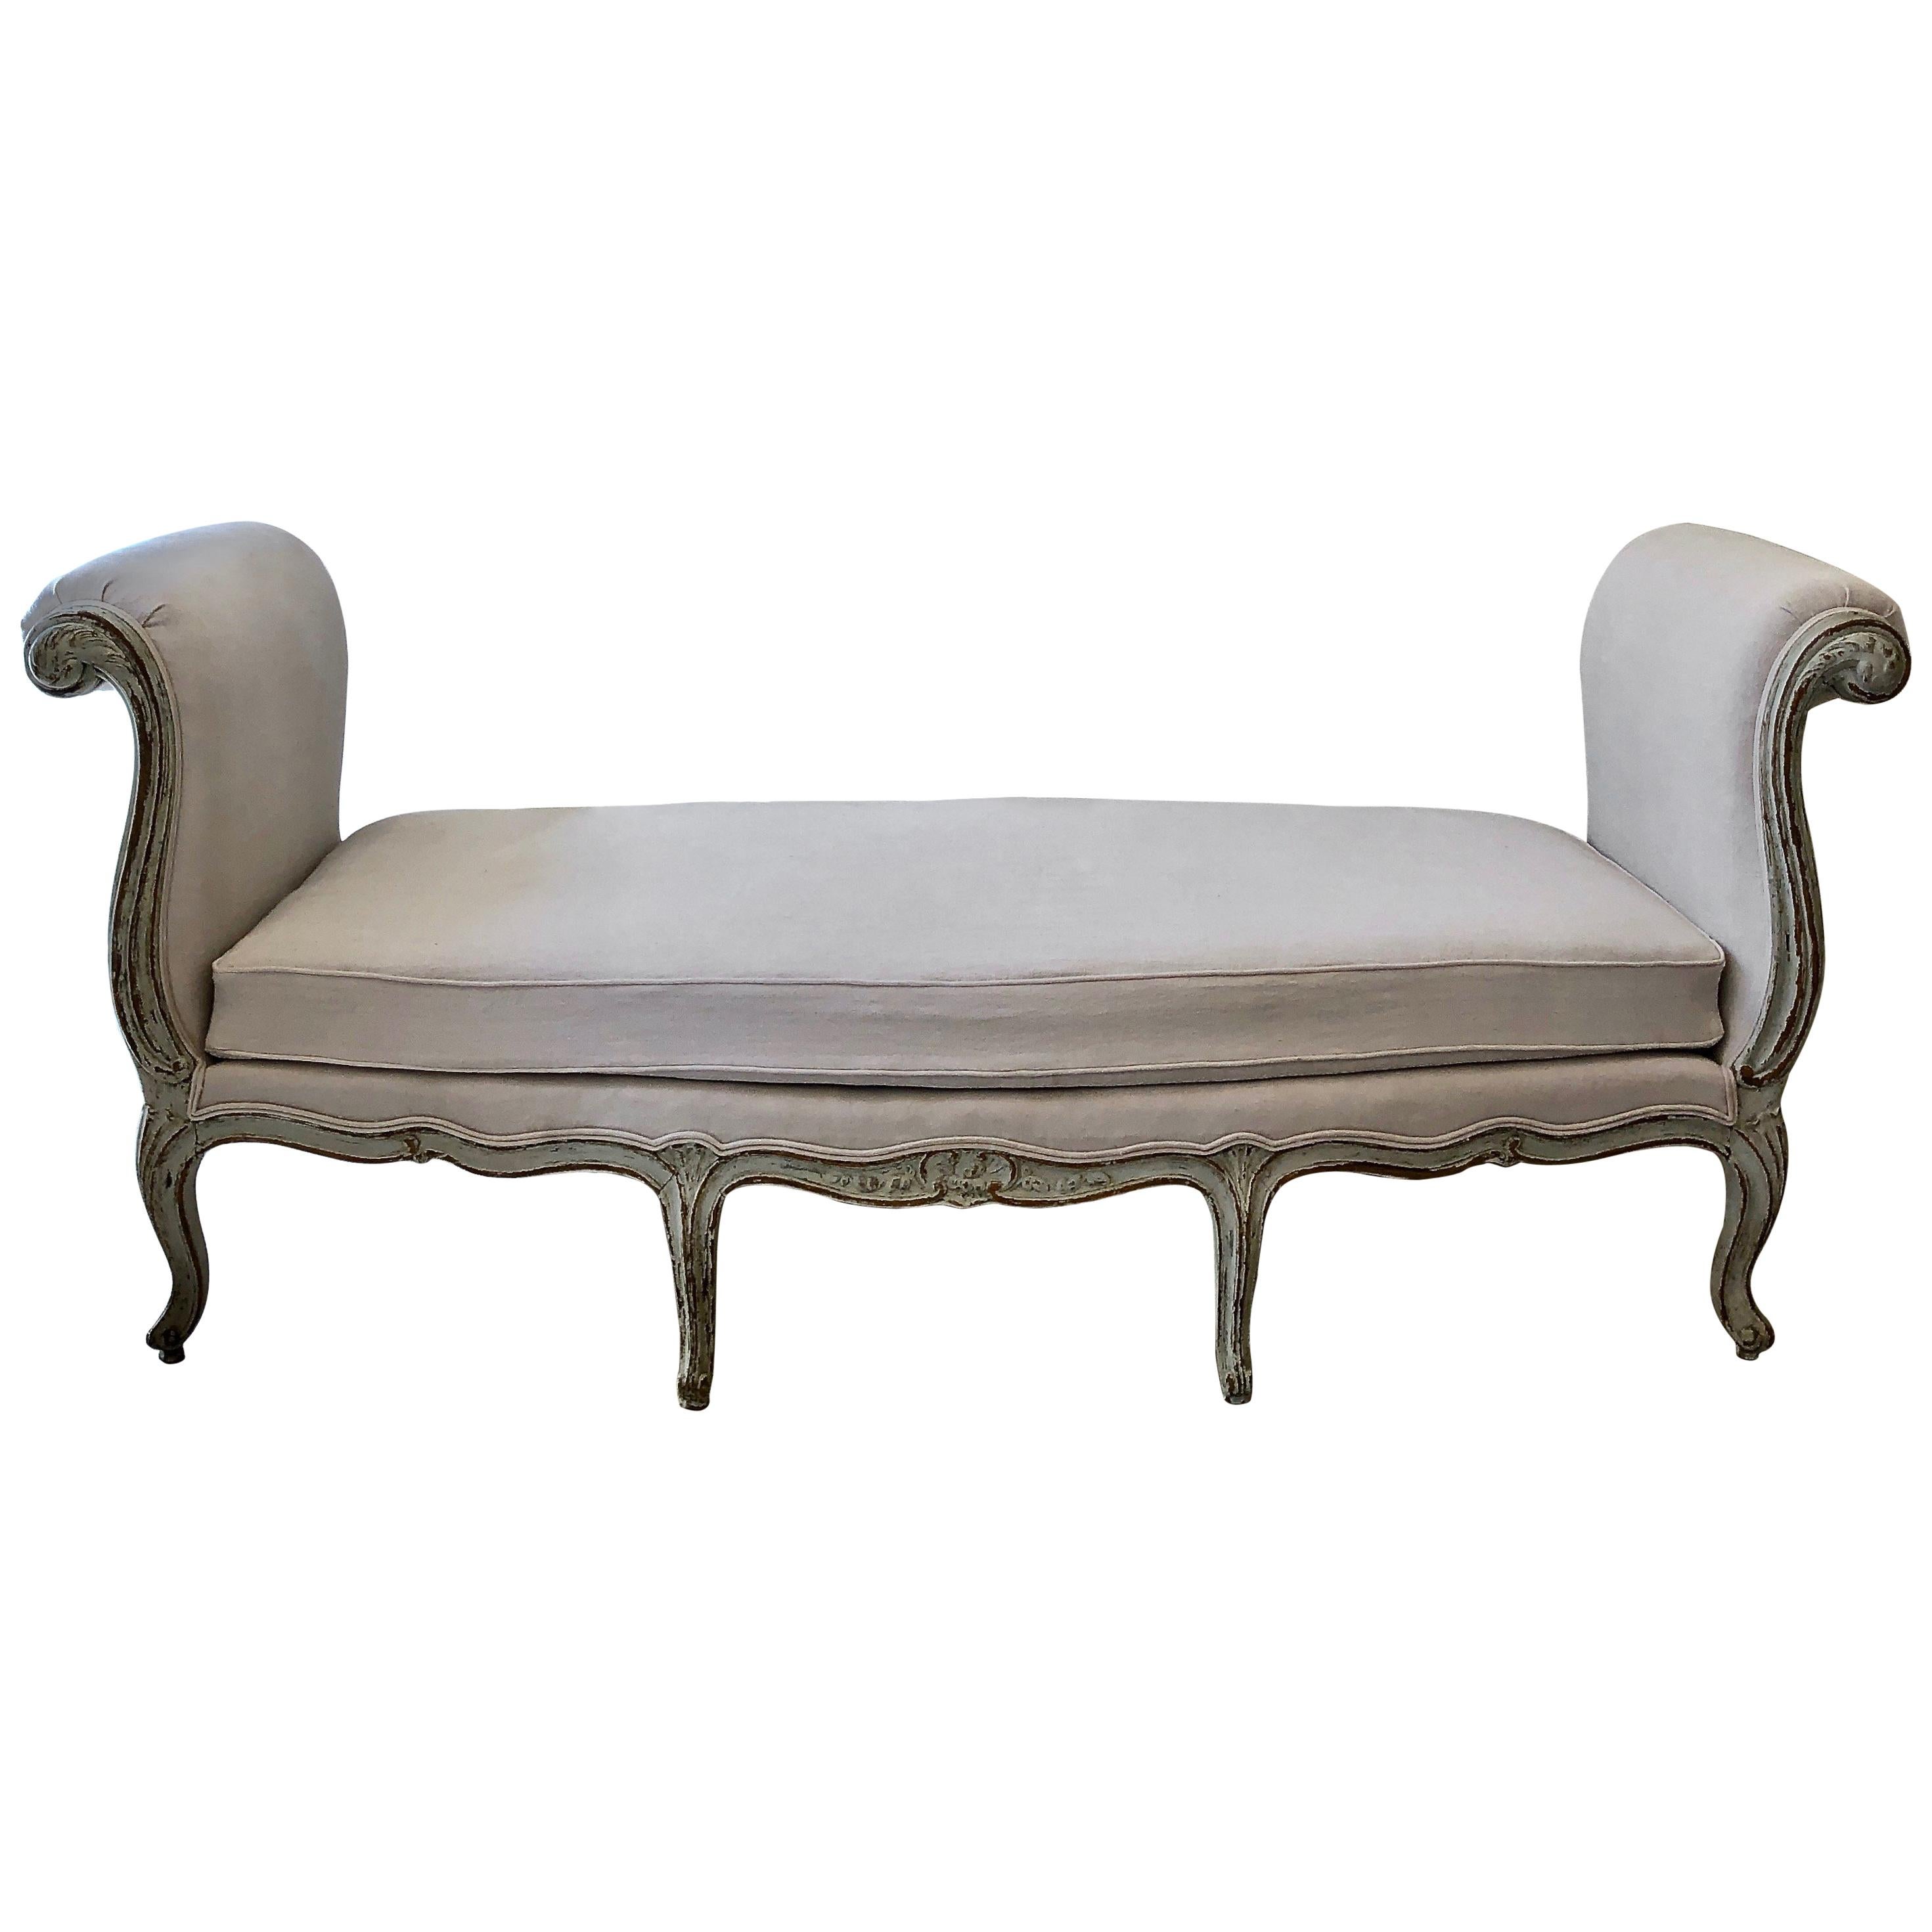 18th Century French Louis XV Style Daybed or Settee